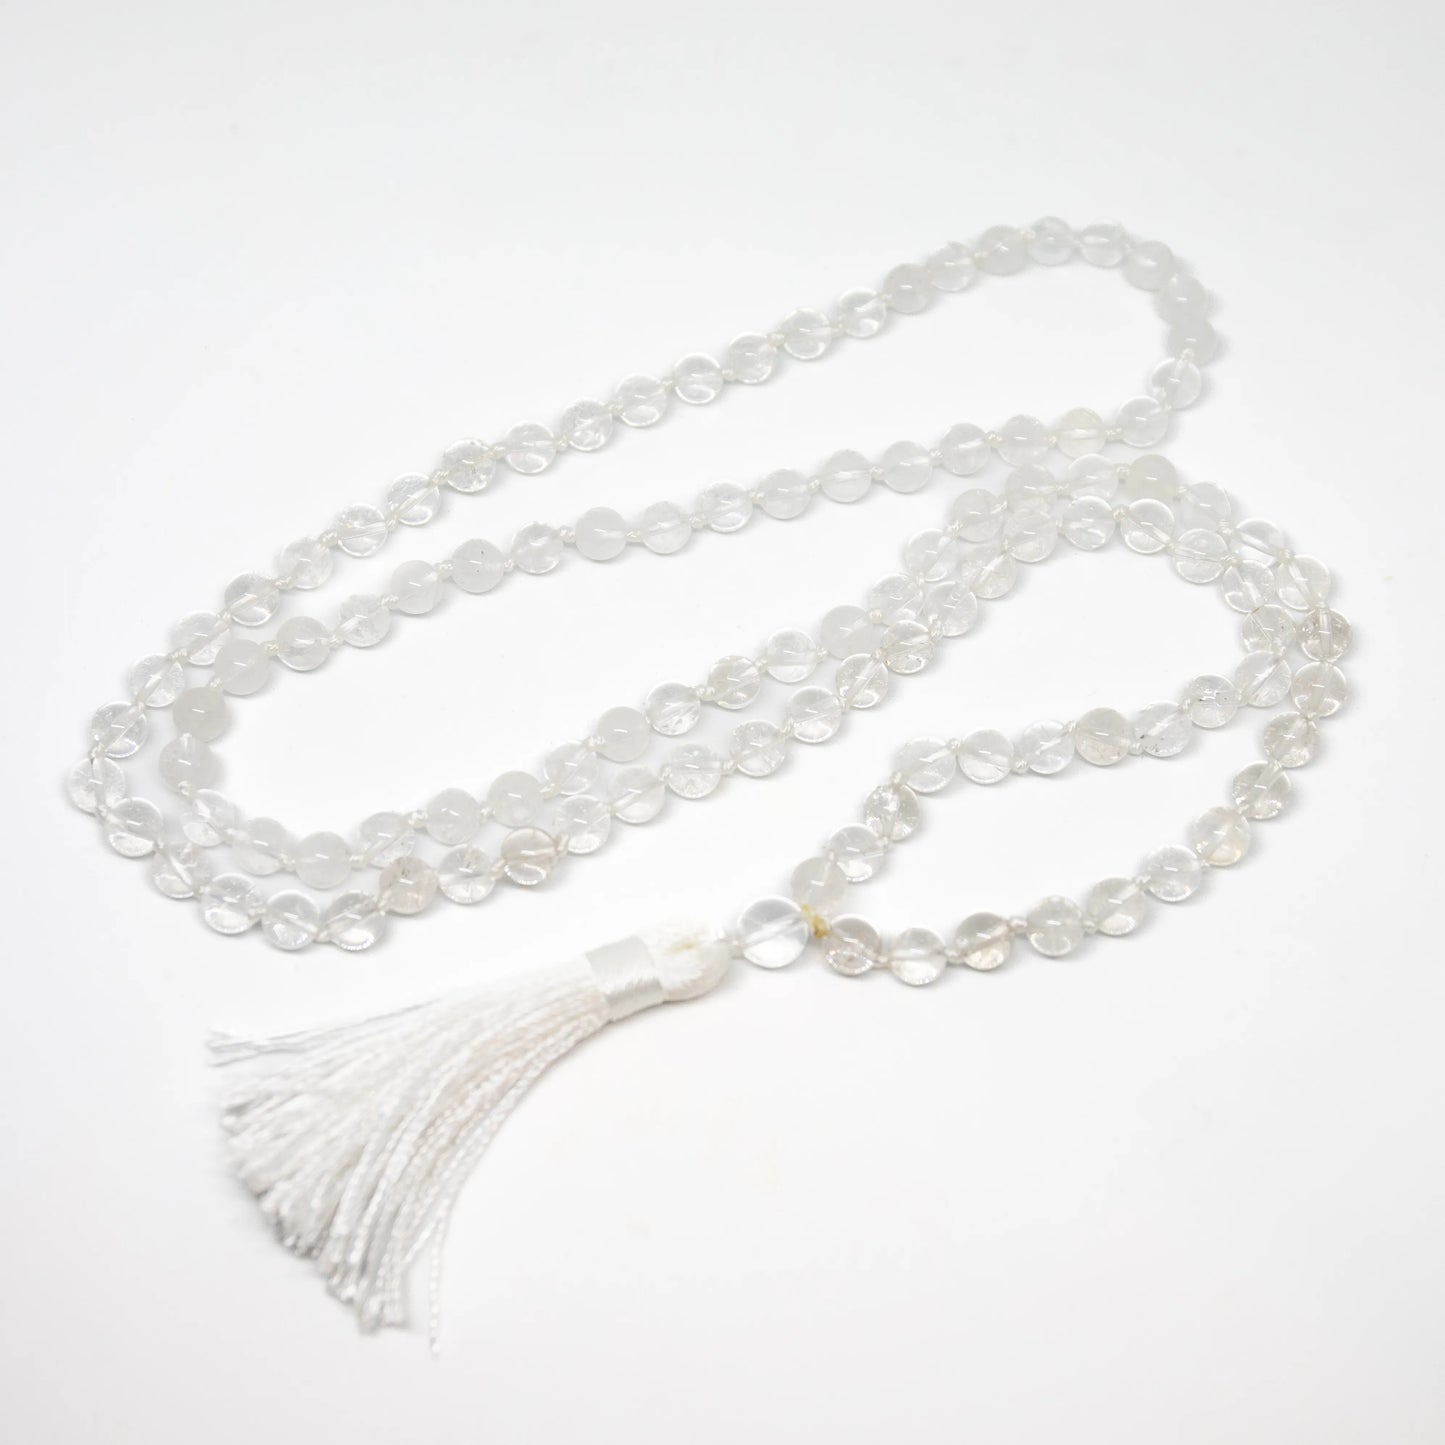 Clear Quartz Knotted 108 Bead Mala - Prayer Beads - 8mm (1 Pack)